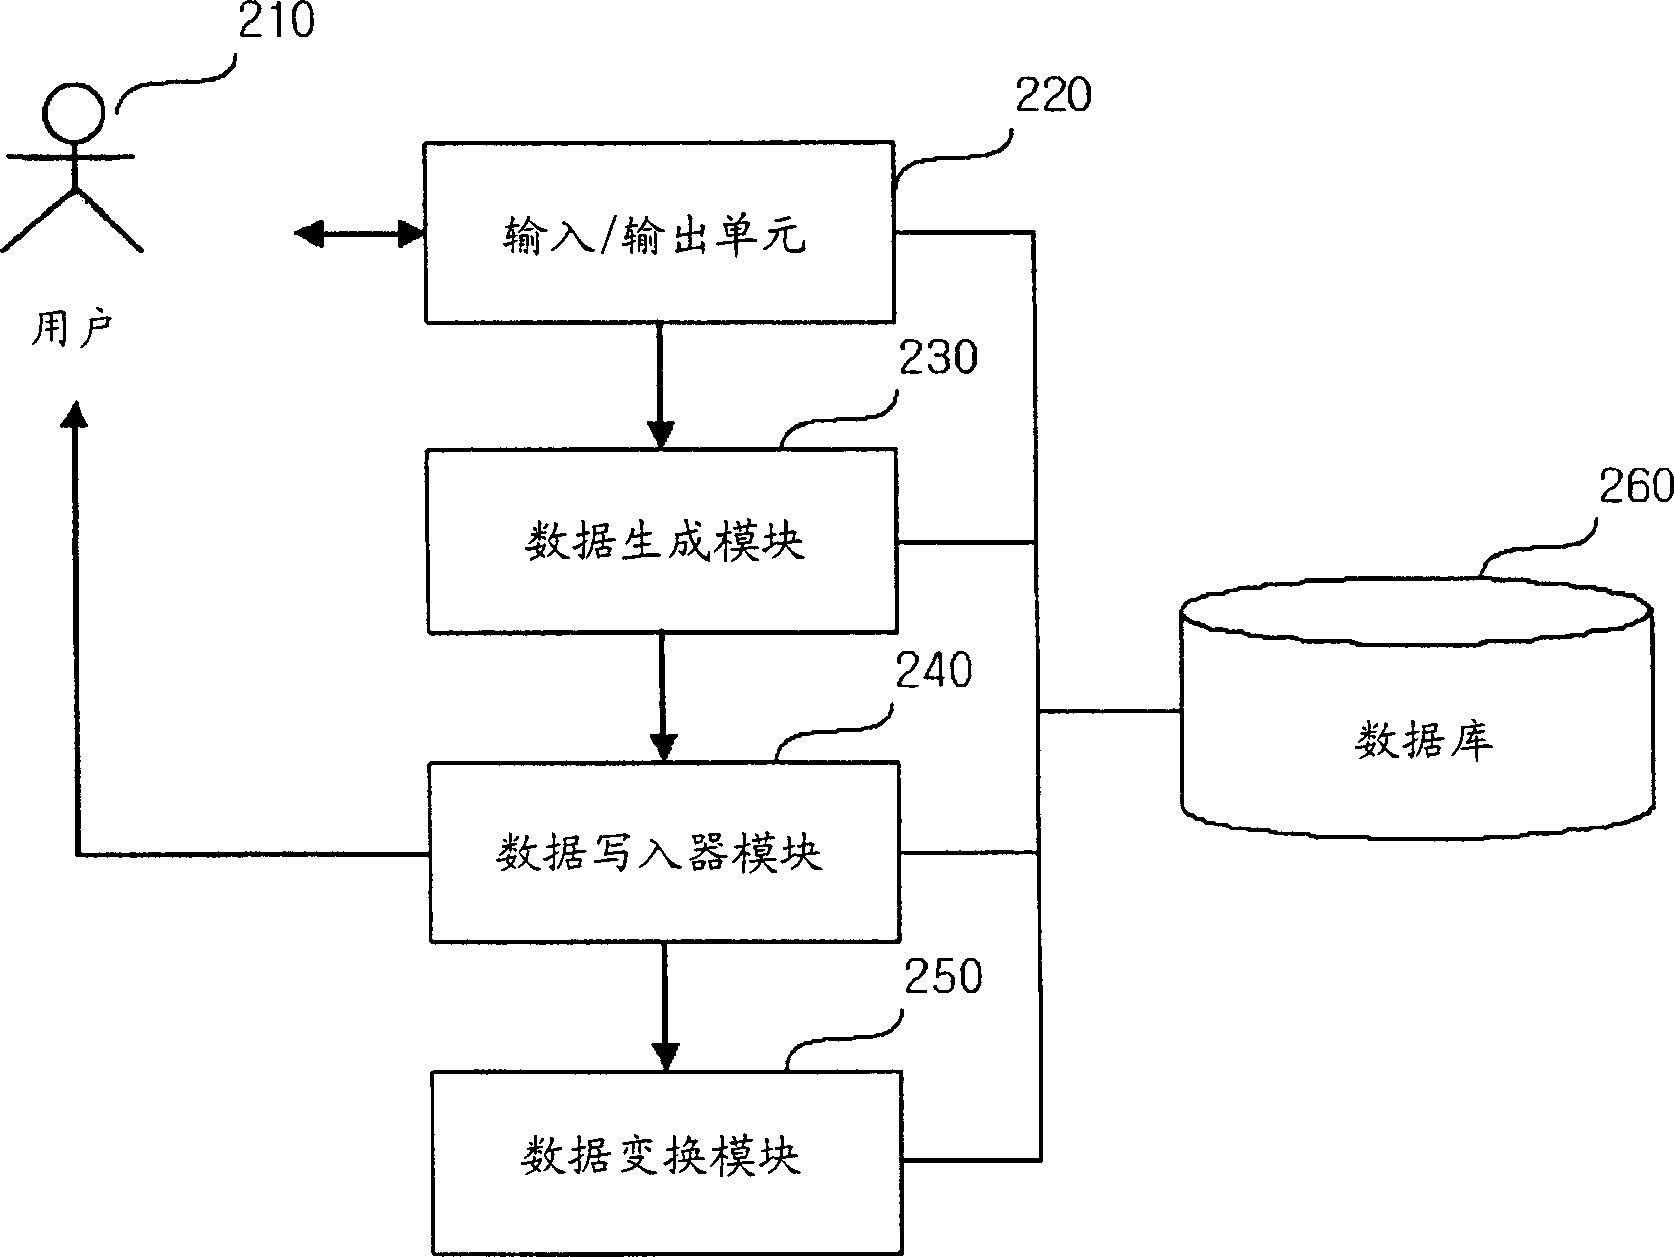 Test stream generating method and apparatus for supporting various standards and testing levels